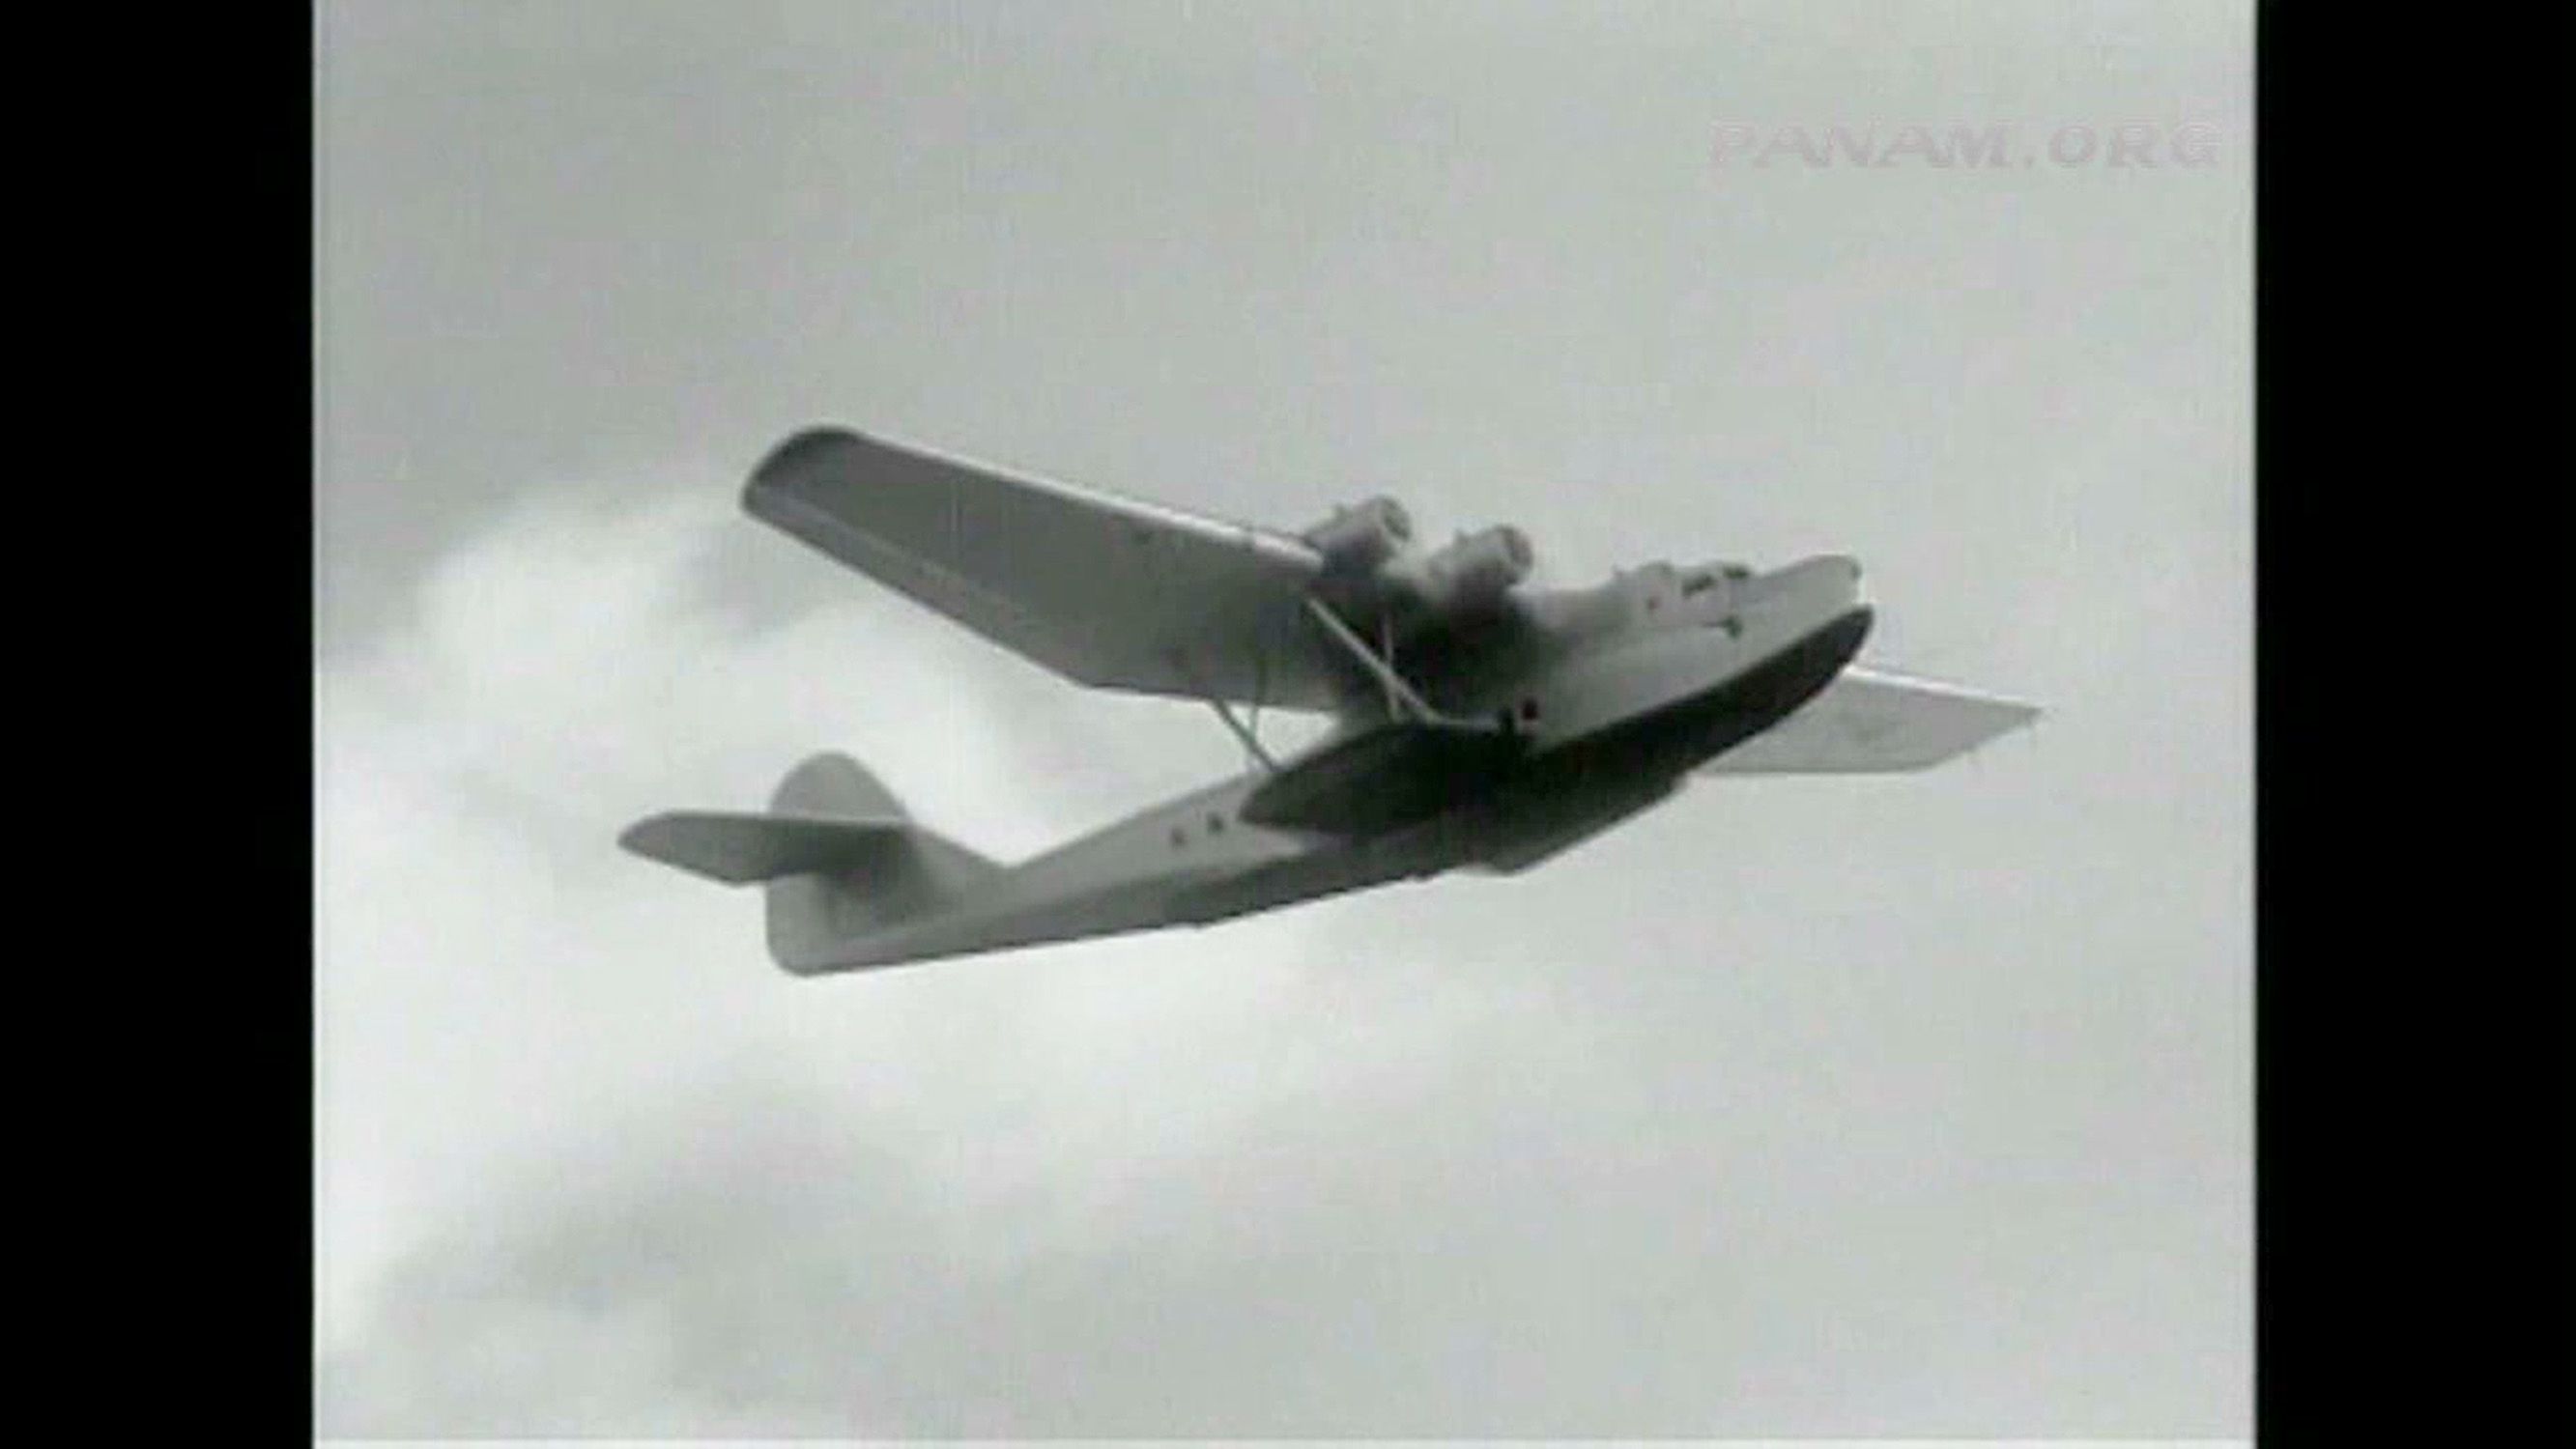 Frame from "Pacific Passage," about the Pan Am M-130 China Clipper